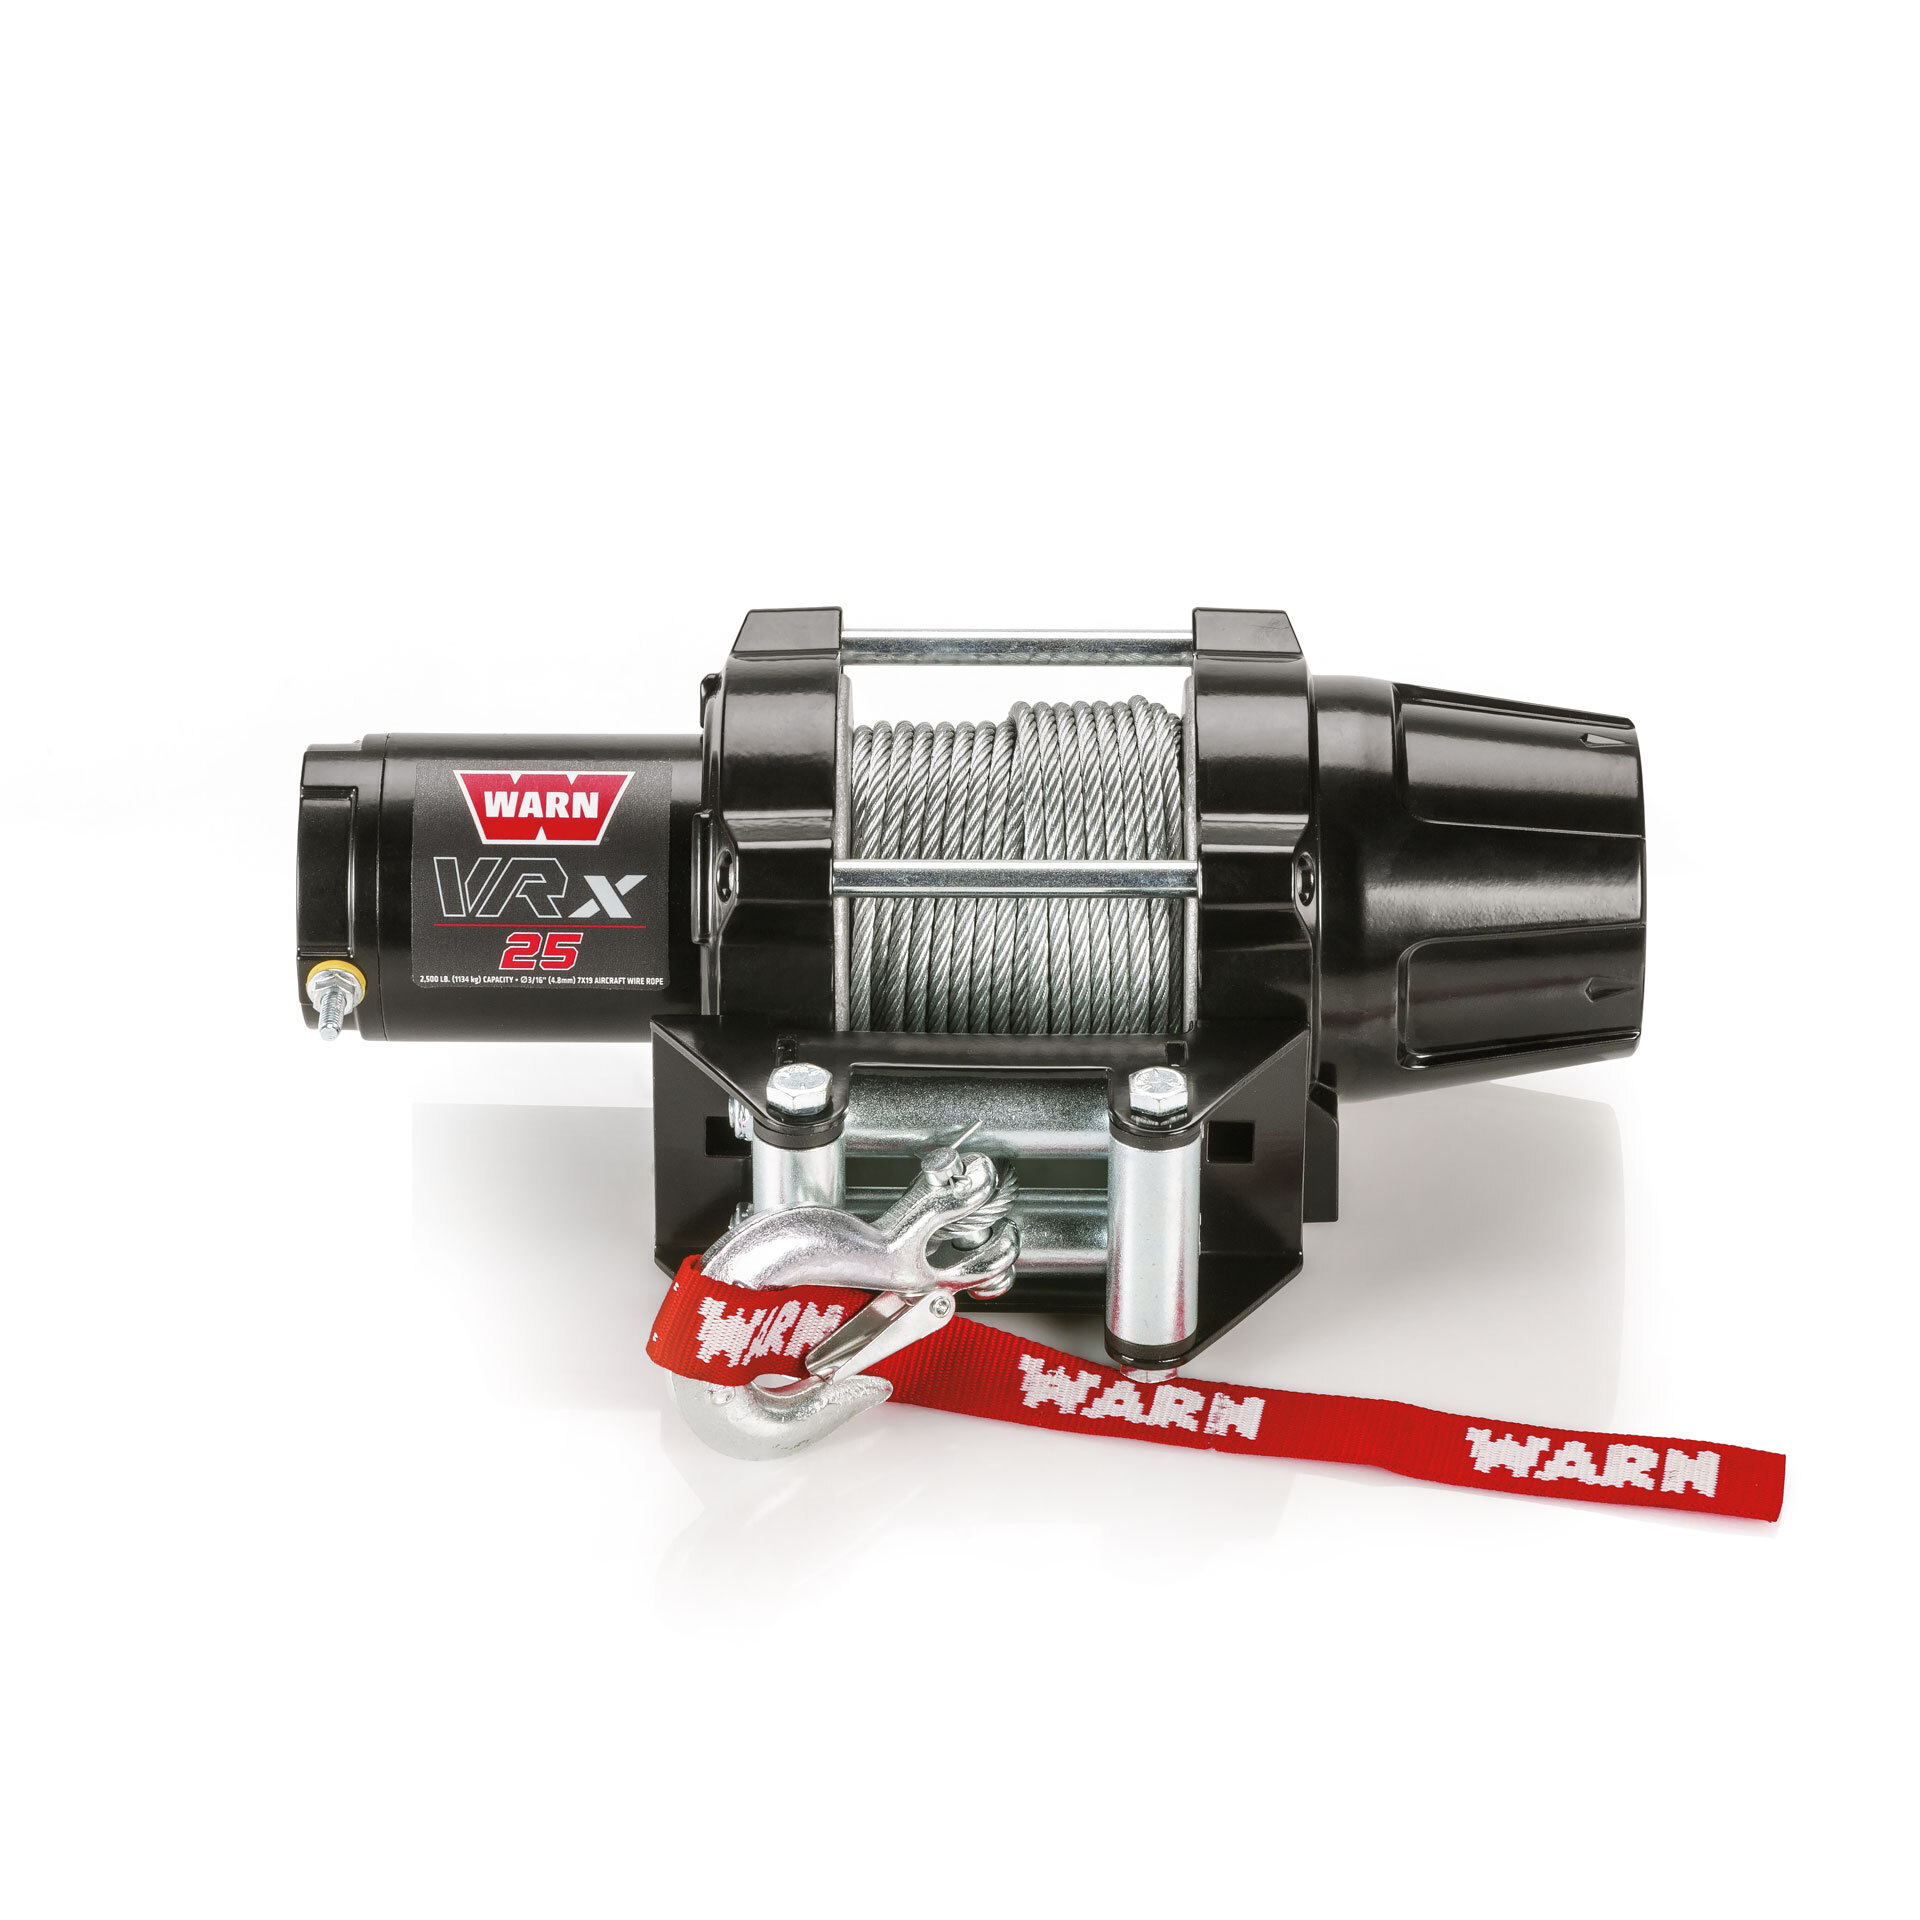 WARN® VRX 2500 Winch with Wire Rope